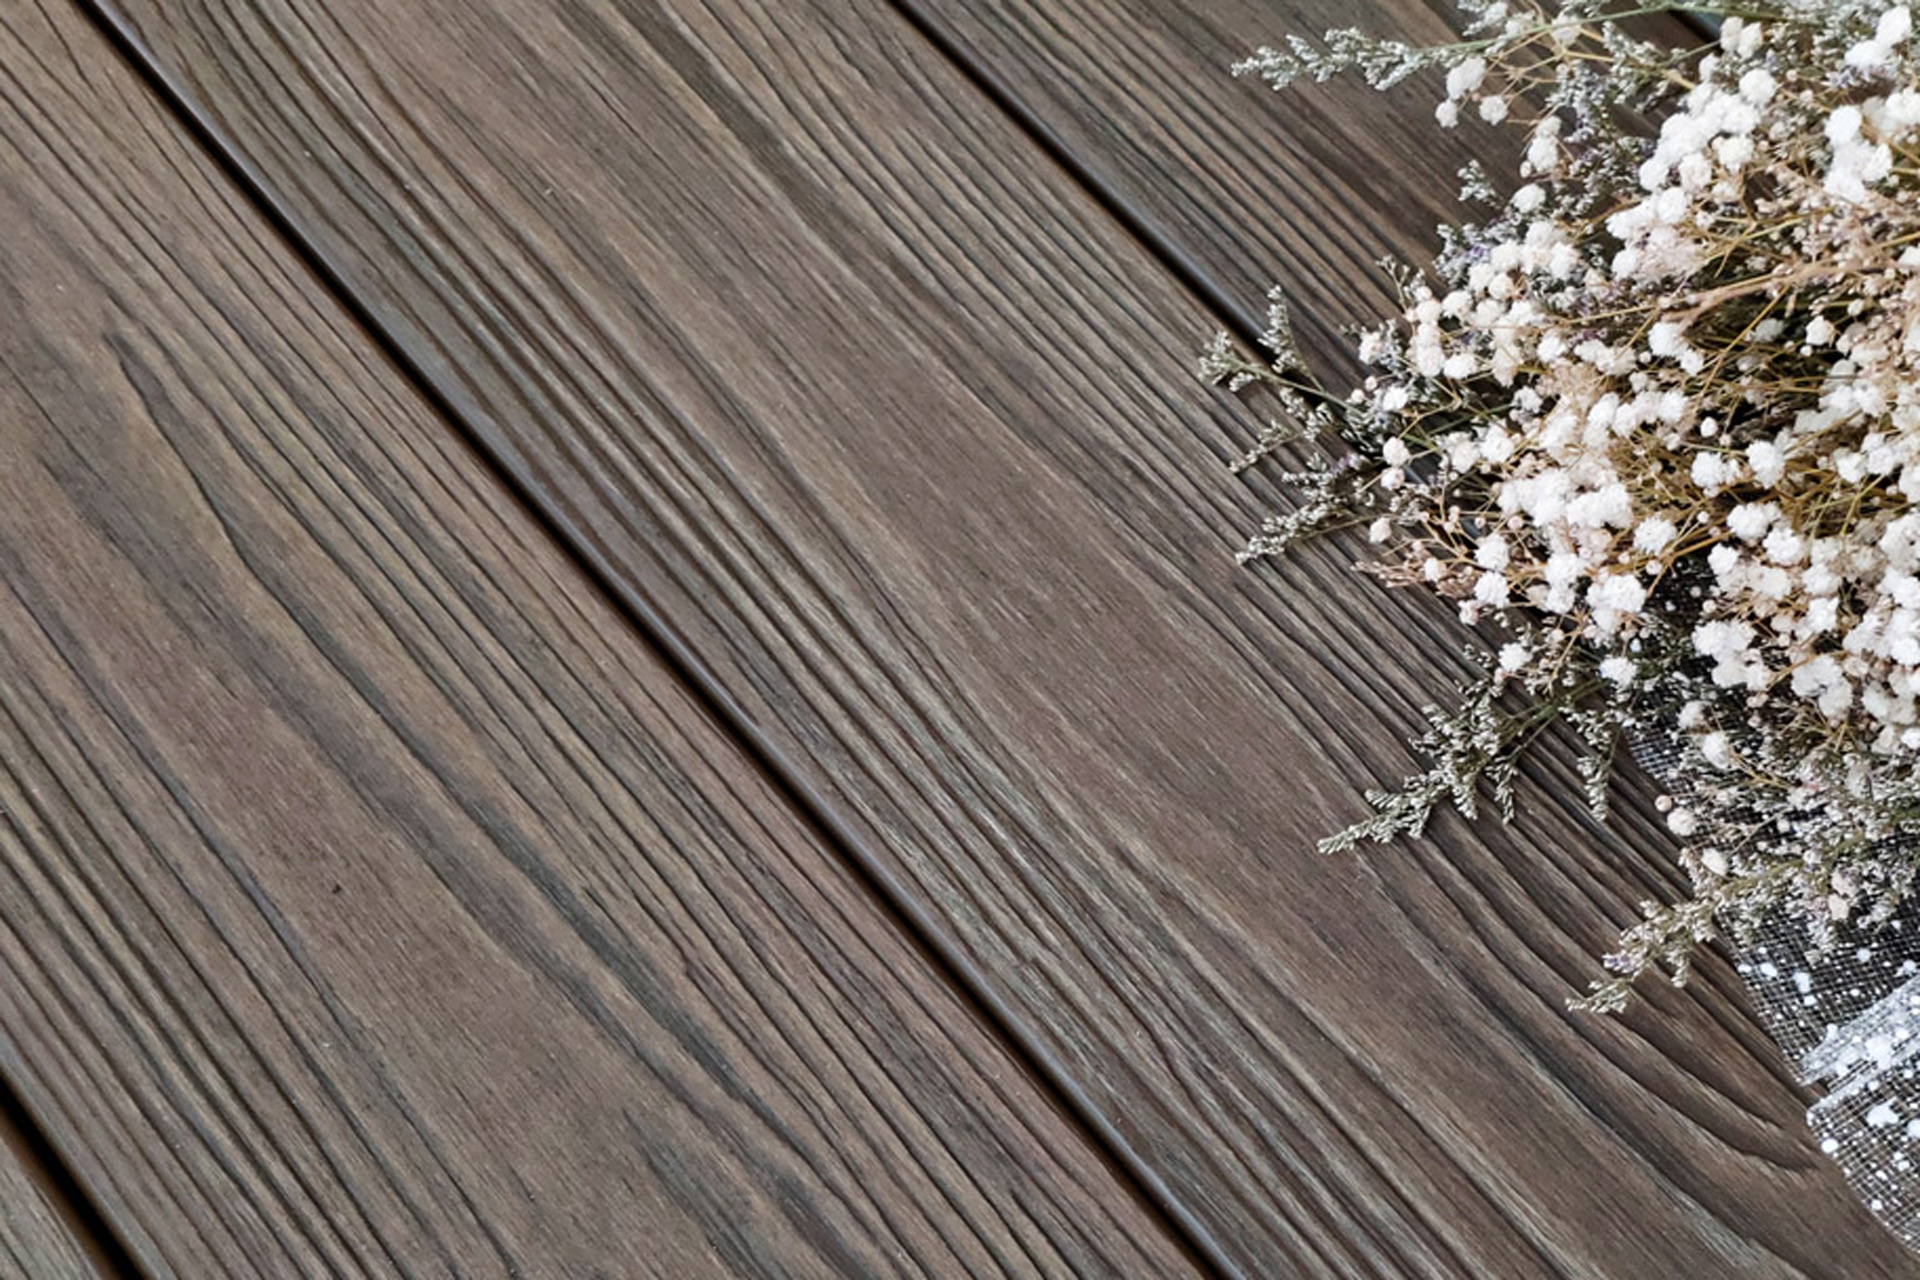 Close up view of dark composite deck boards showing the look-alike texture of wood with white flower bouquet off to the side. 